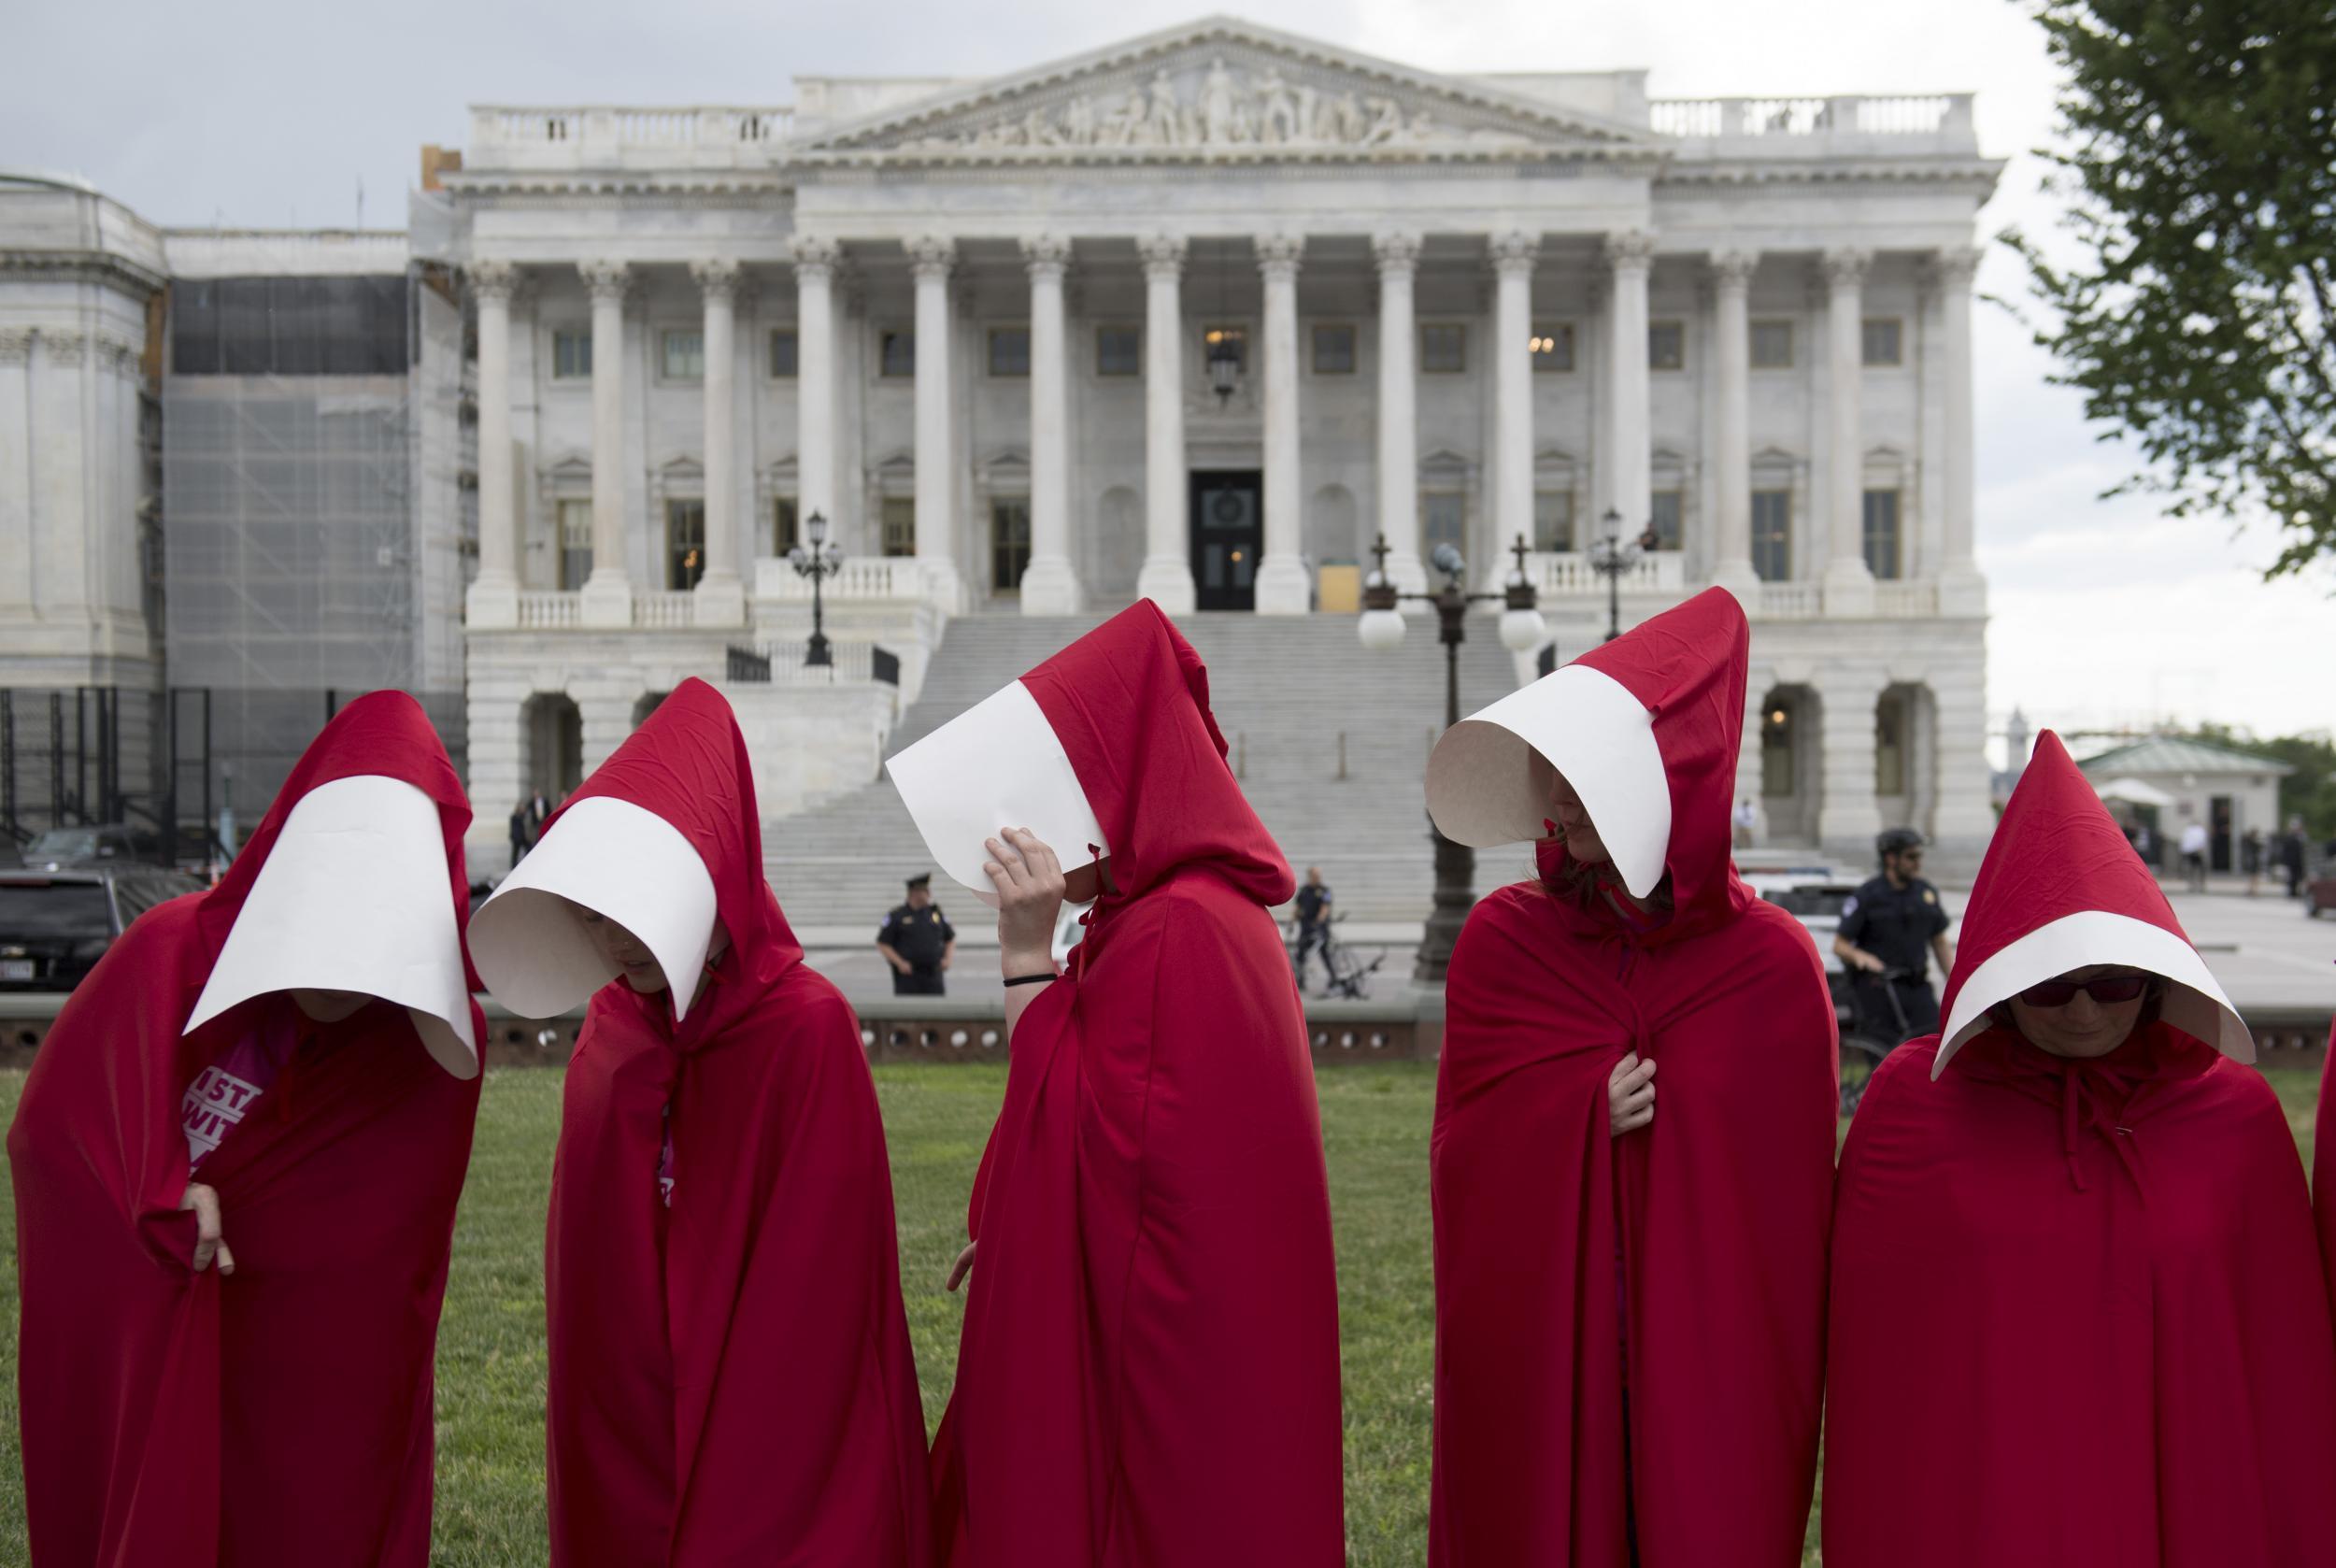 Women dress as characters from ‘The Handmaid's Tale’ protest anti-abortion legislation in the US